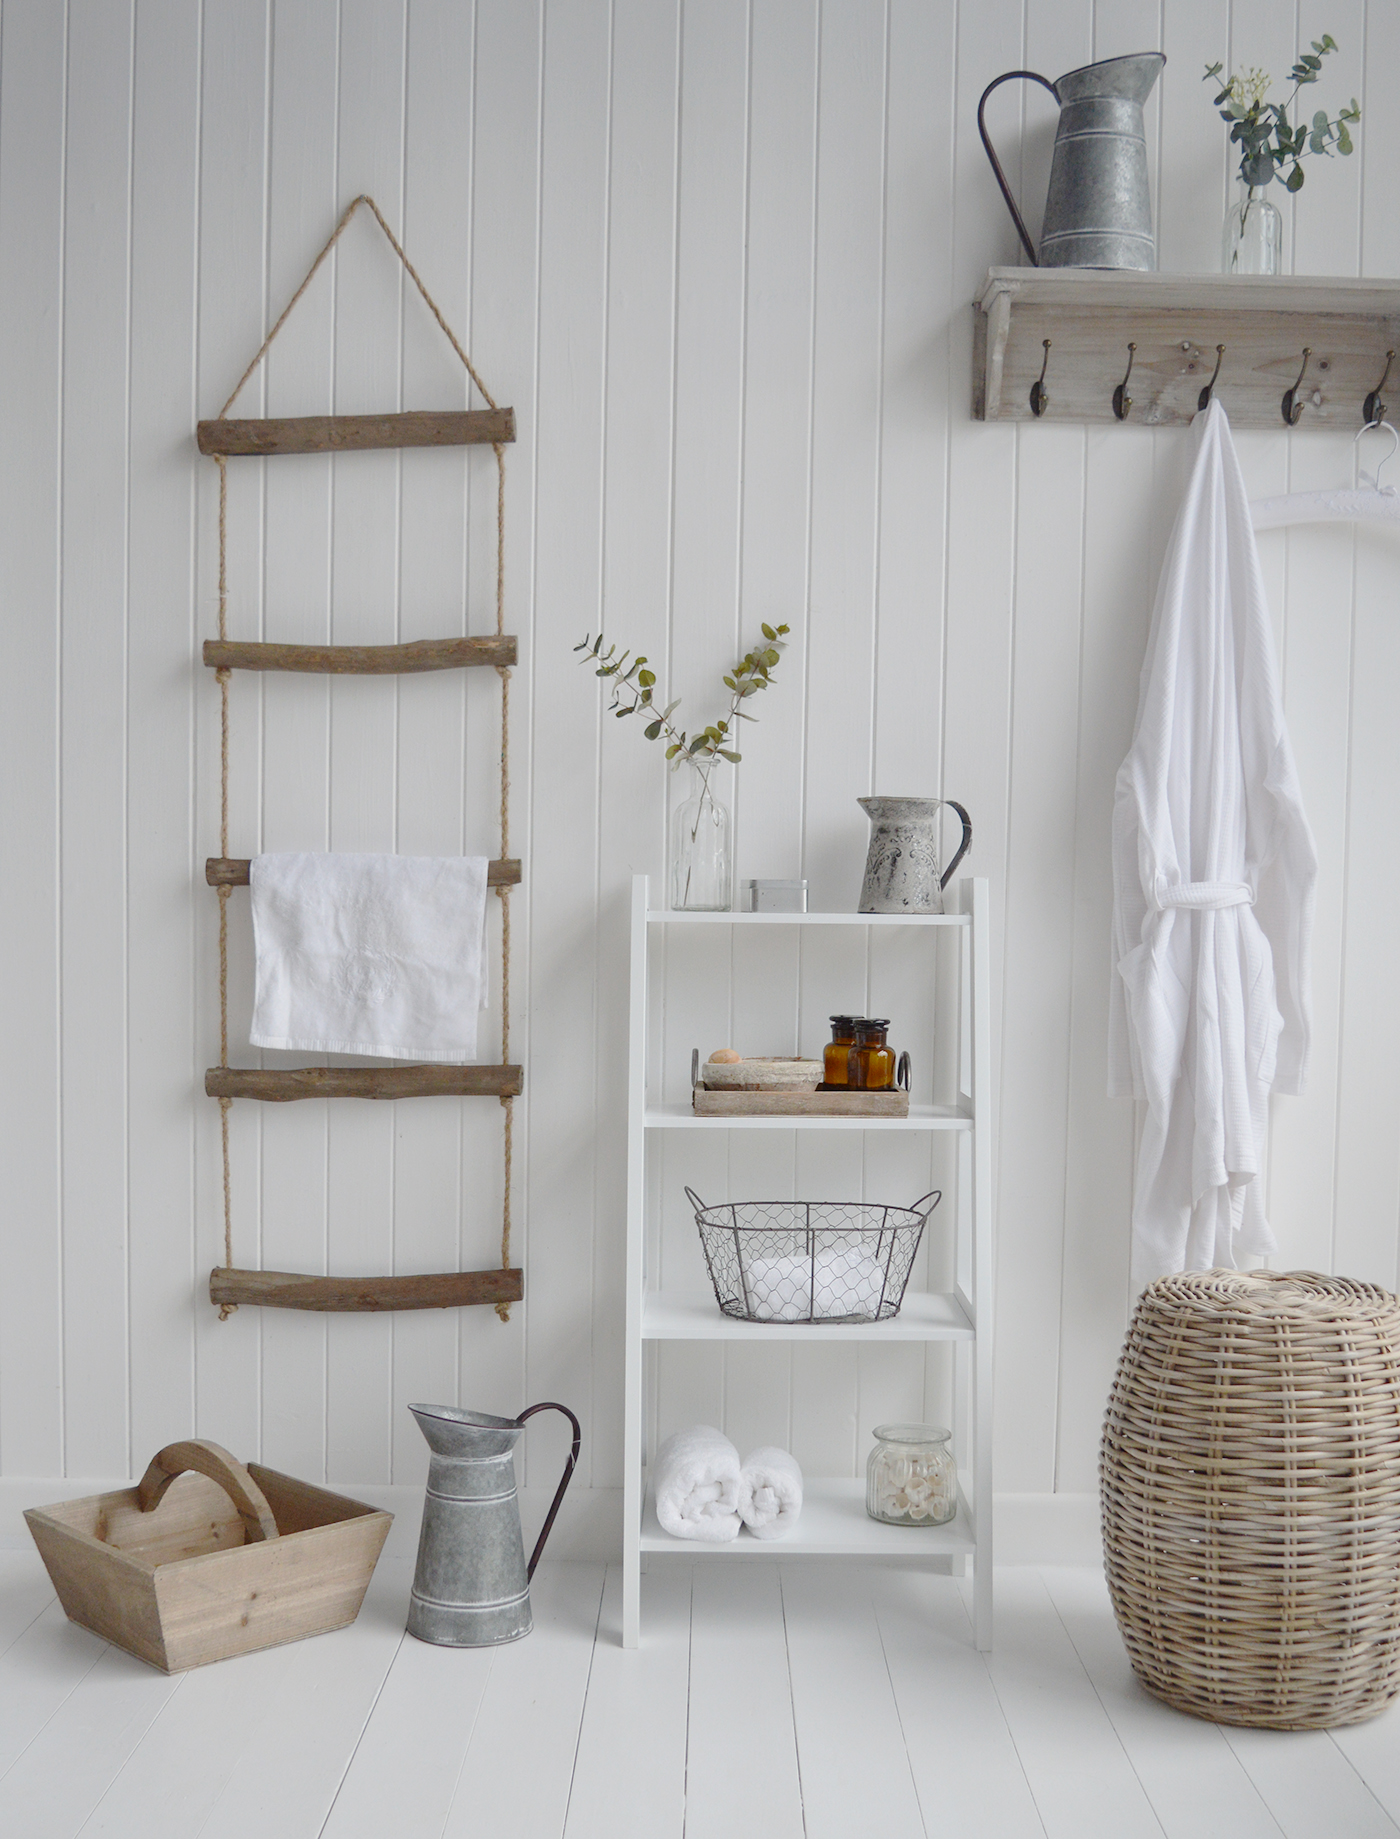 A rope towel ladder to hang towels in bathroom or blanket ladder for the living room. from The White Lighthouse Furniture , New England interiors and furniture for the hallway, living room, bedroom and bathroom